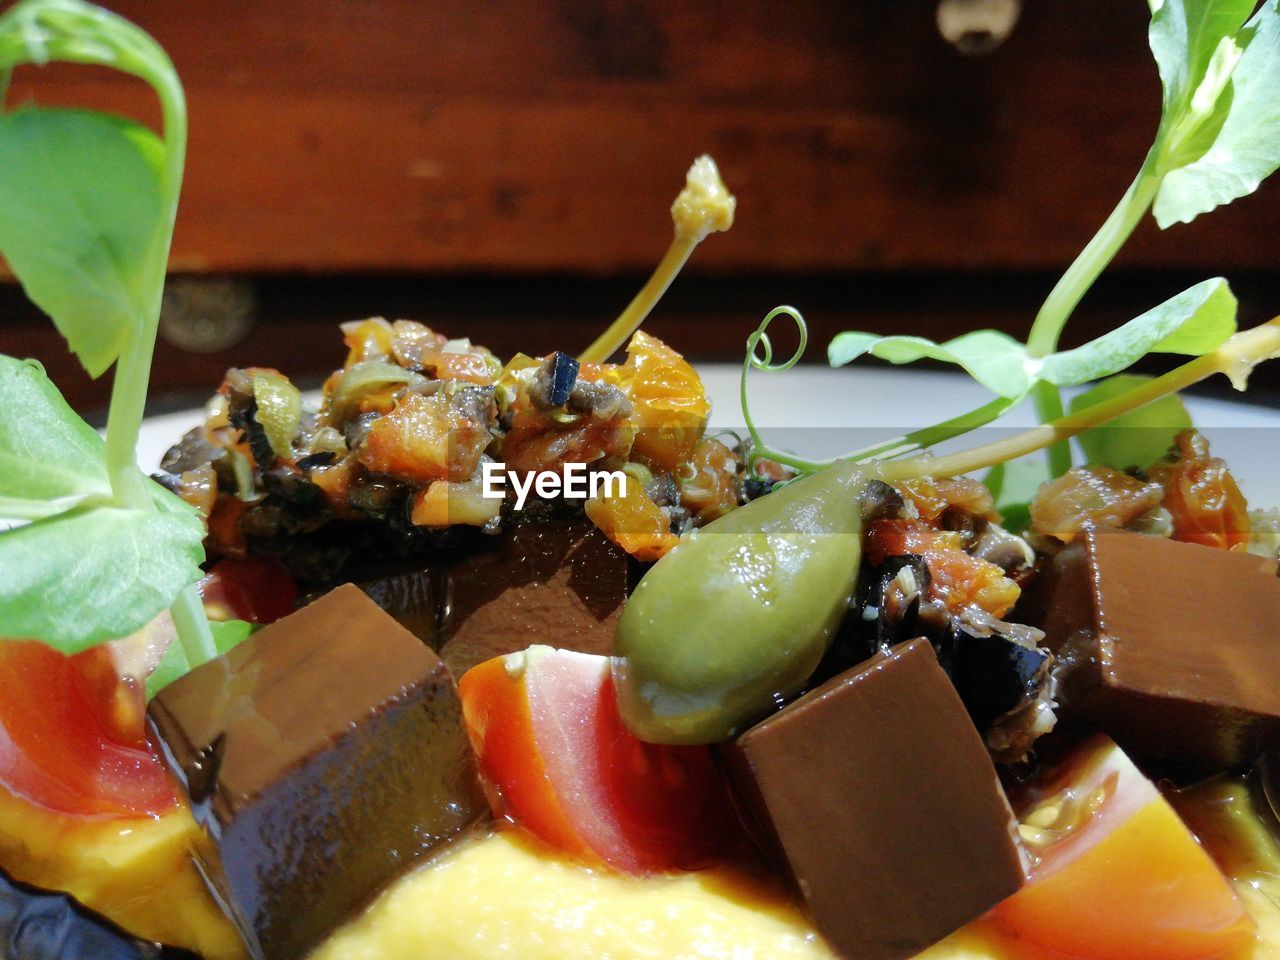 CLOSE-UP OF CHOPPED FRUITS AND VEGETABLES IN PLATE